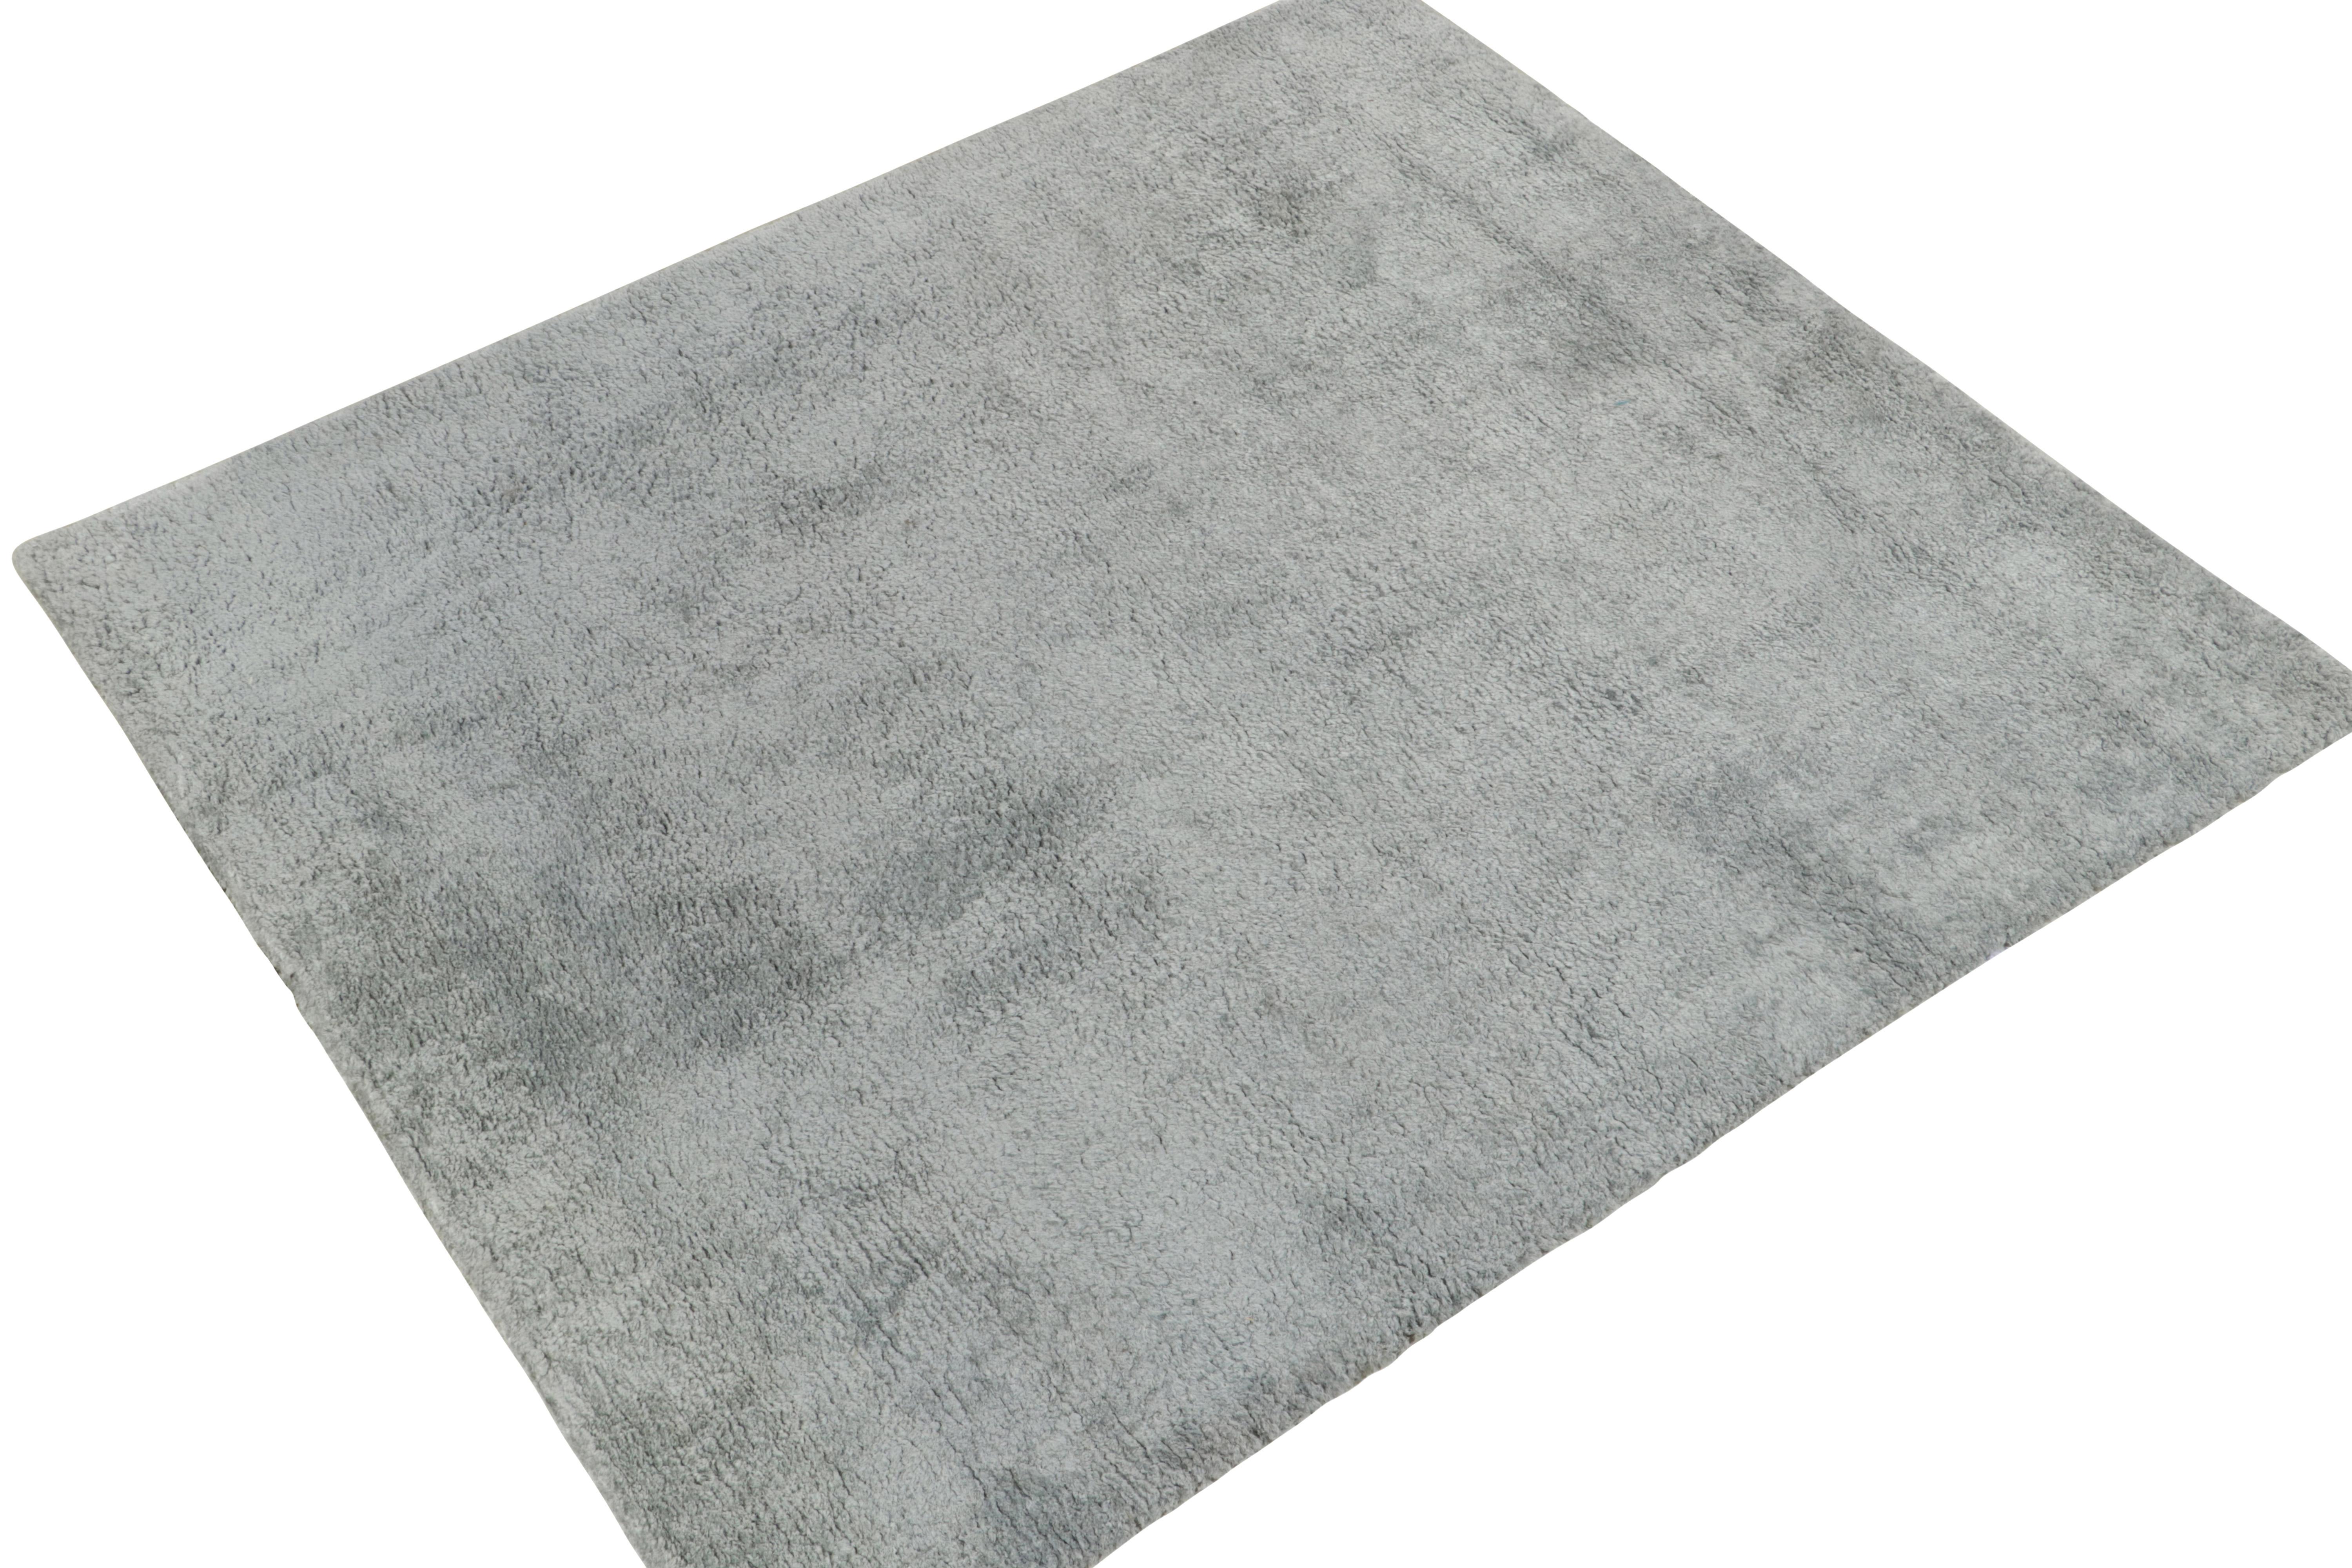 Hailing from Rug & Kilim’s Texture of Color collection, this 7x8 rug highlights our principal Josh’s passion for innovating tone-on-tone, patternless patterns in luxury rugs. Hand knotted in silk, the shag pile flourishes in a rich solid gray-blue